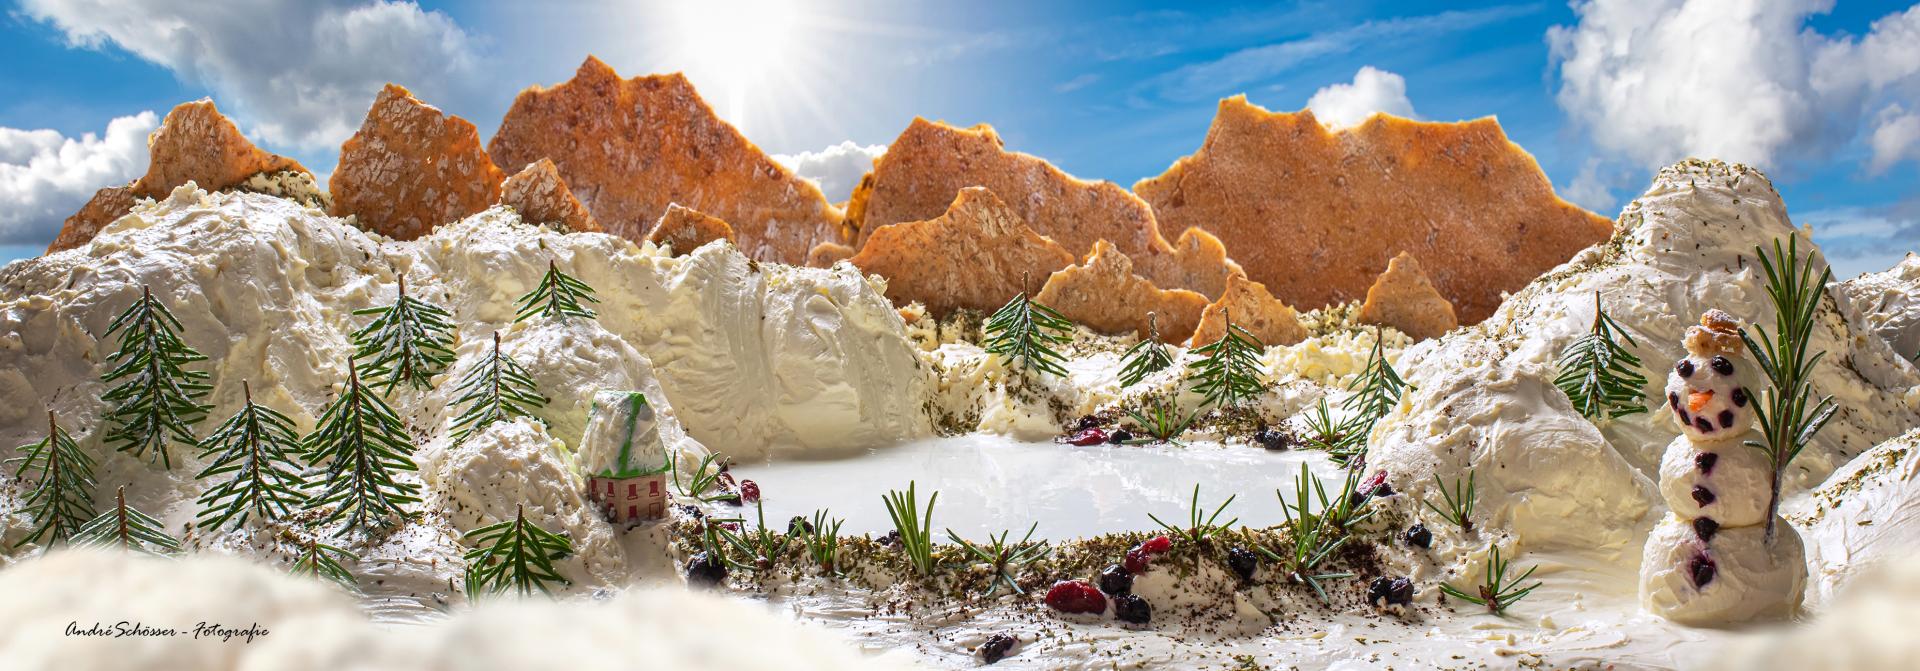 New York Photography Awards Winner - Foodscapes